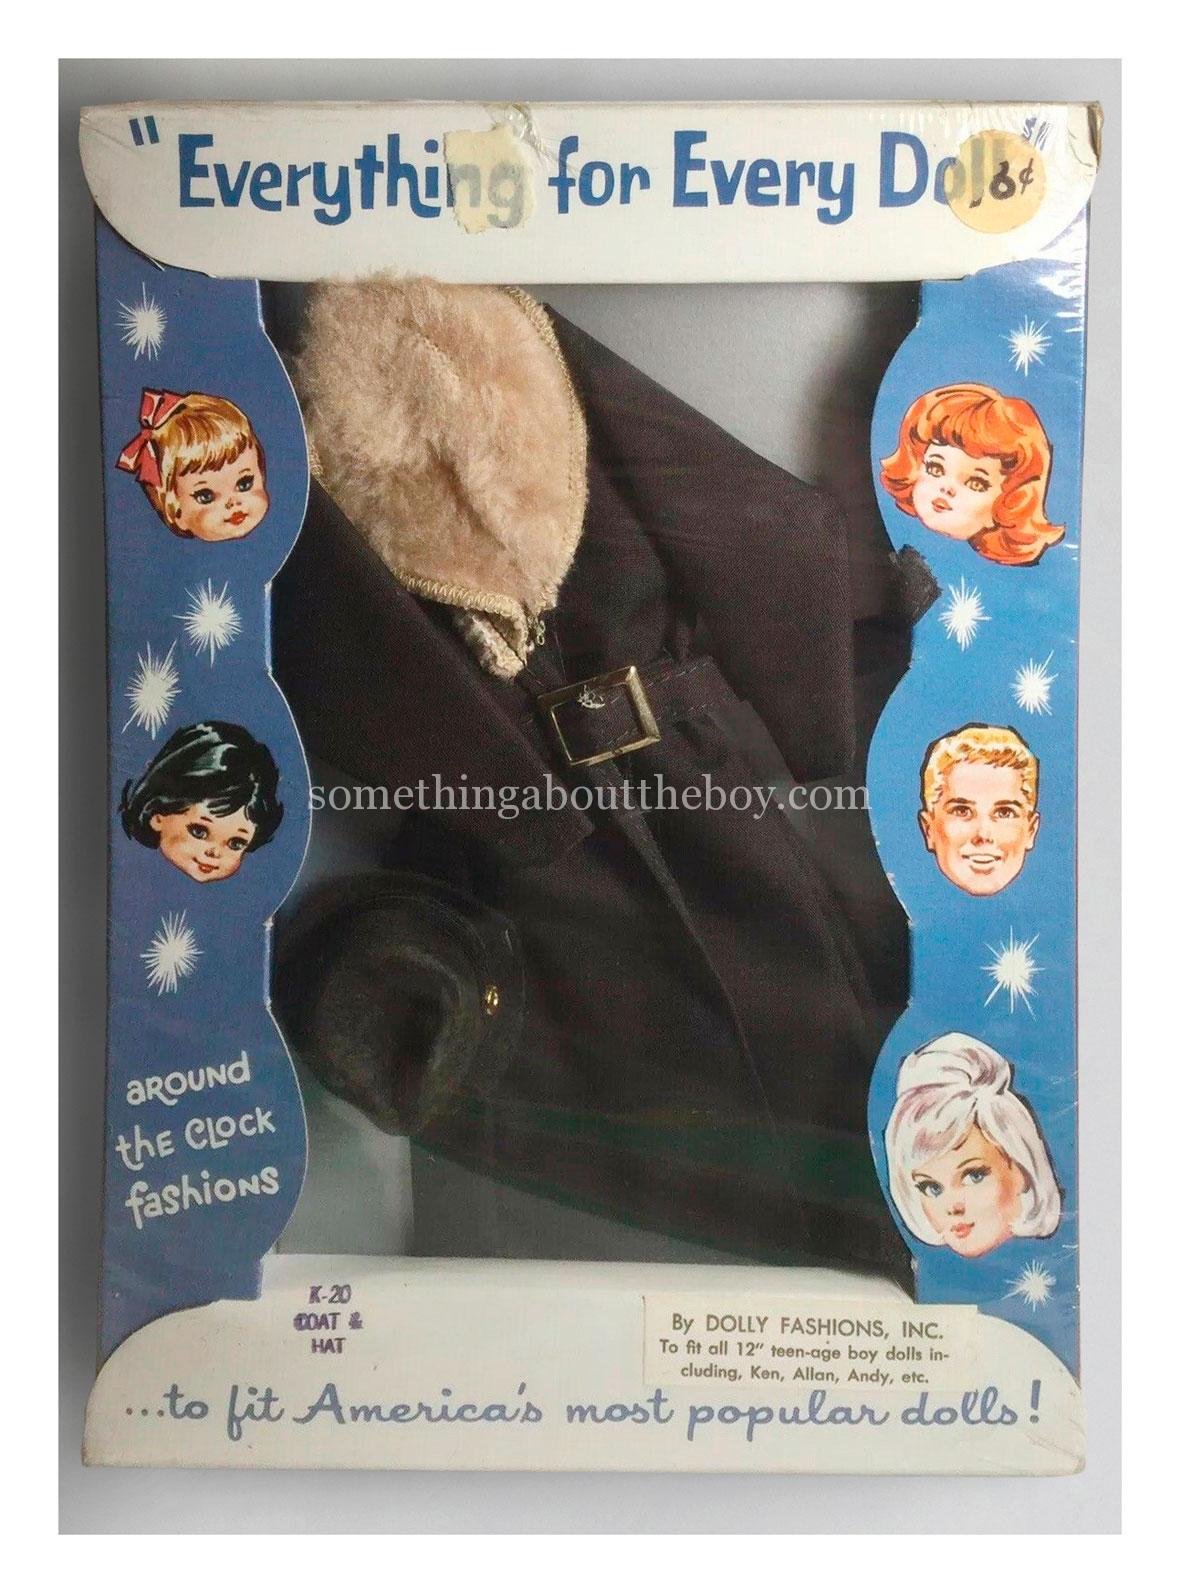 K-20 Coat & Hat by Dolly Fashions Inc.